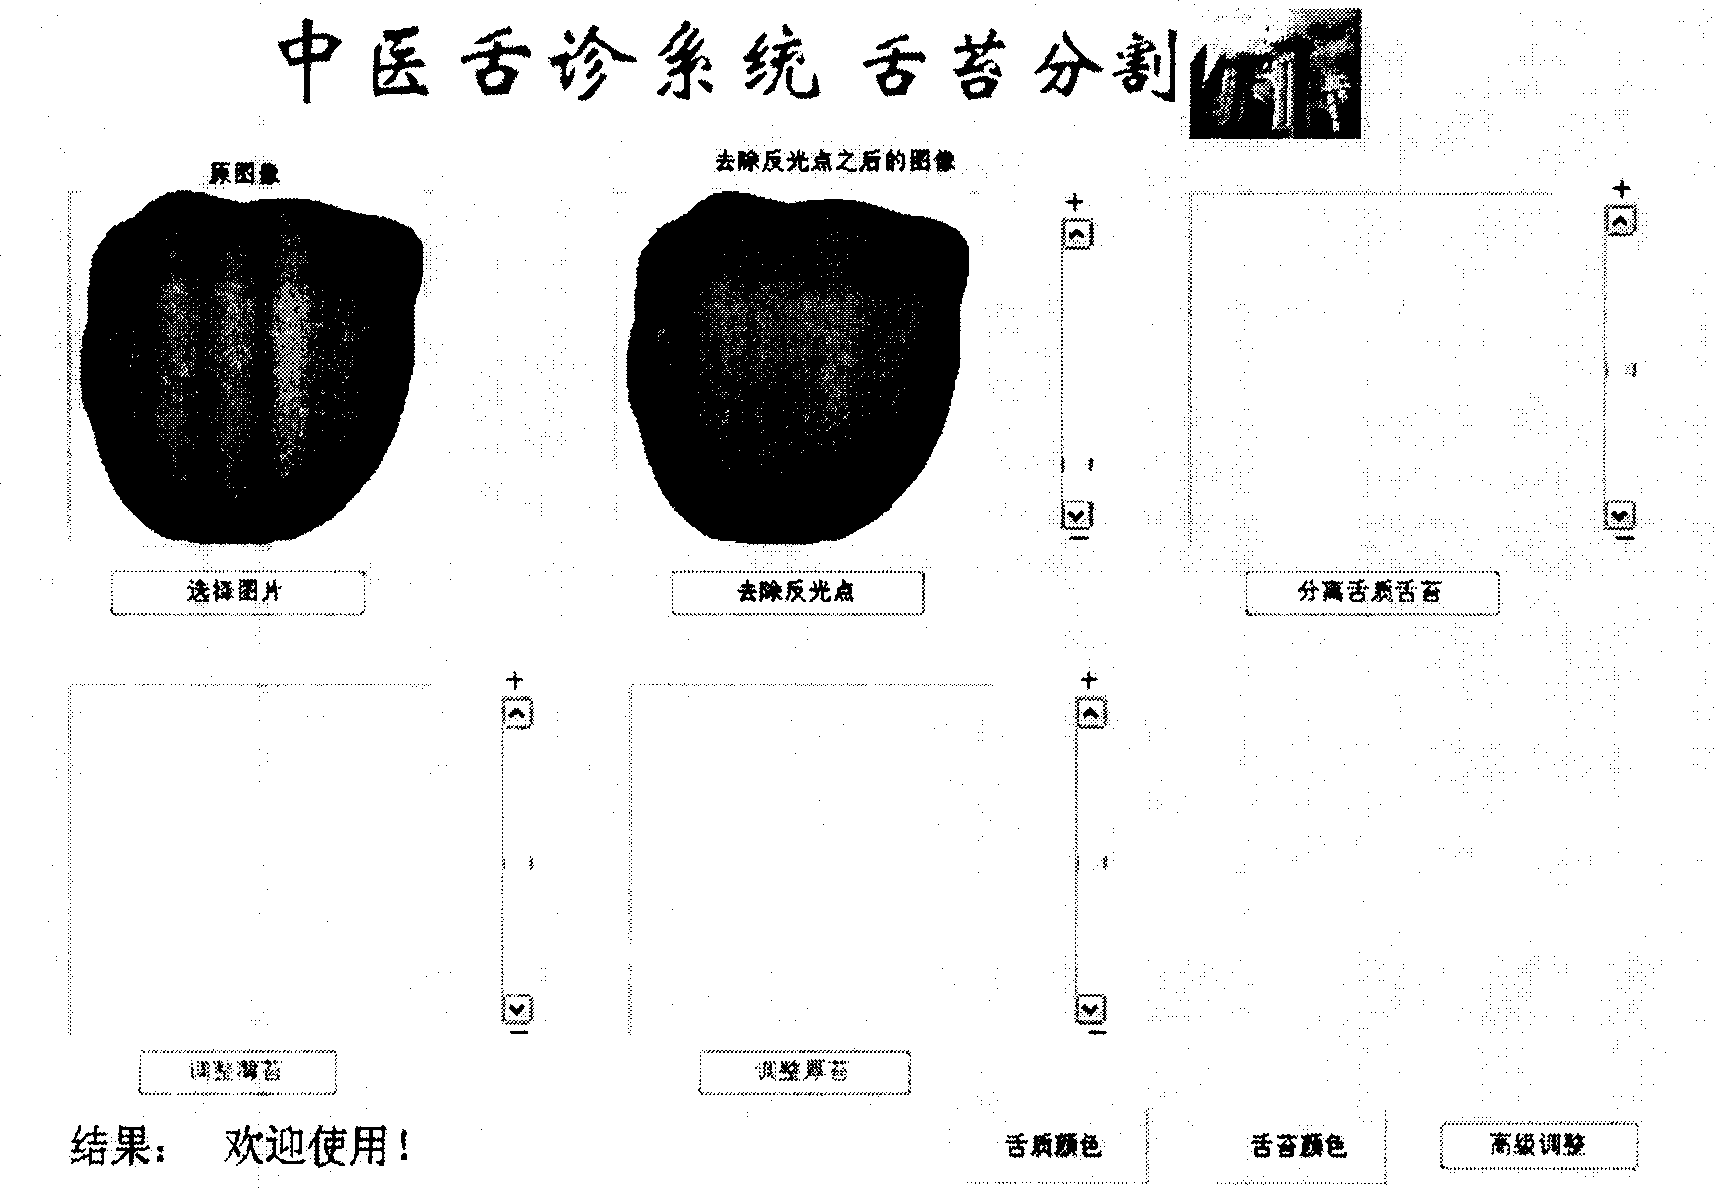 Coated tongue division and extracting method for colored digital photo of tongue